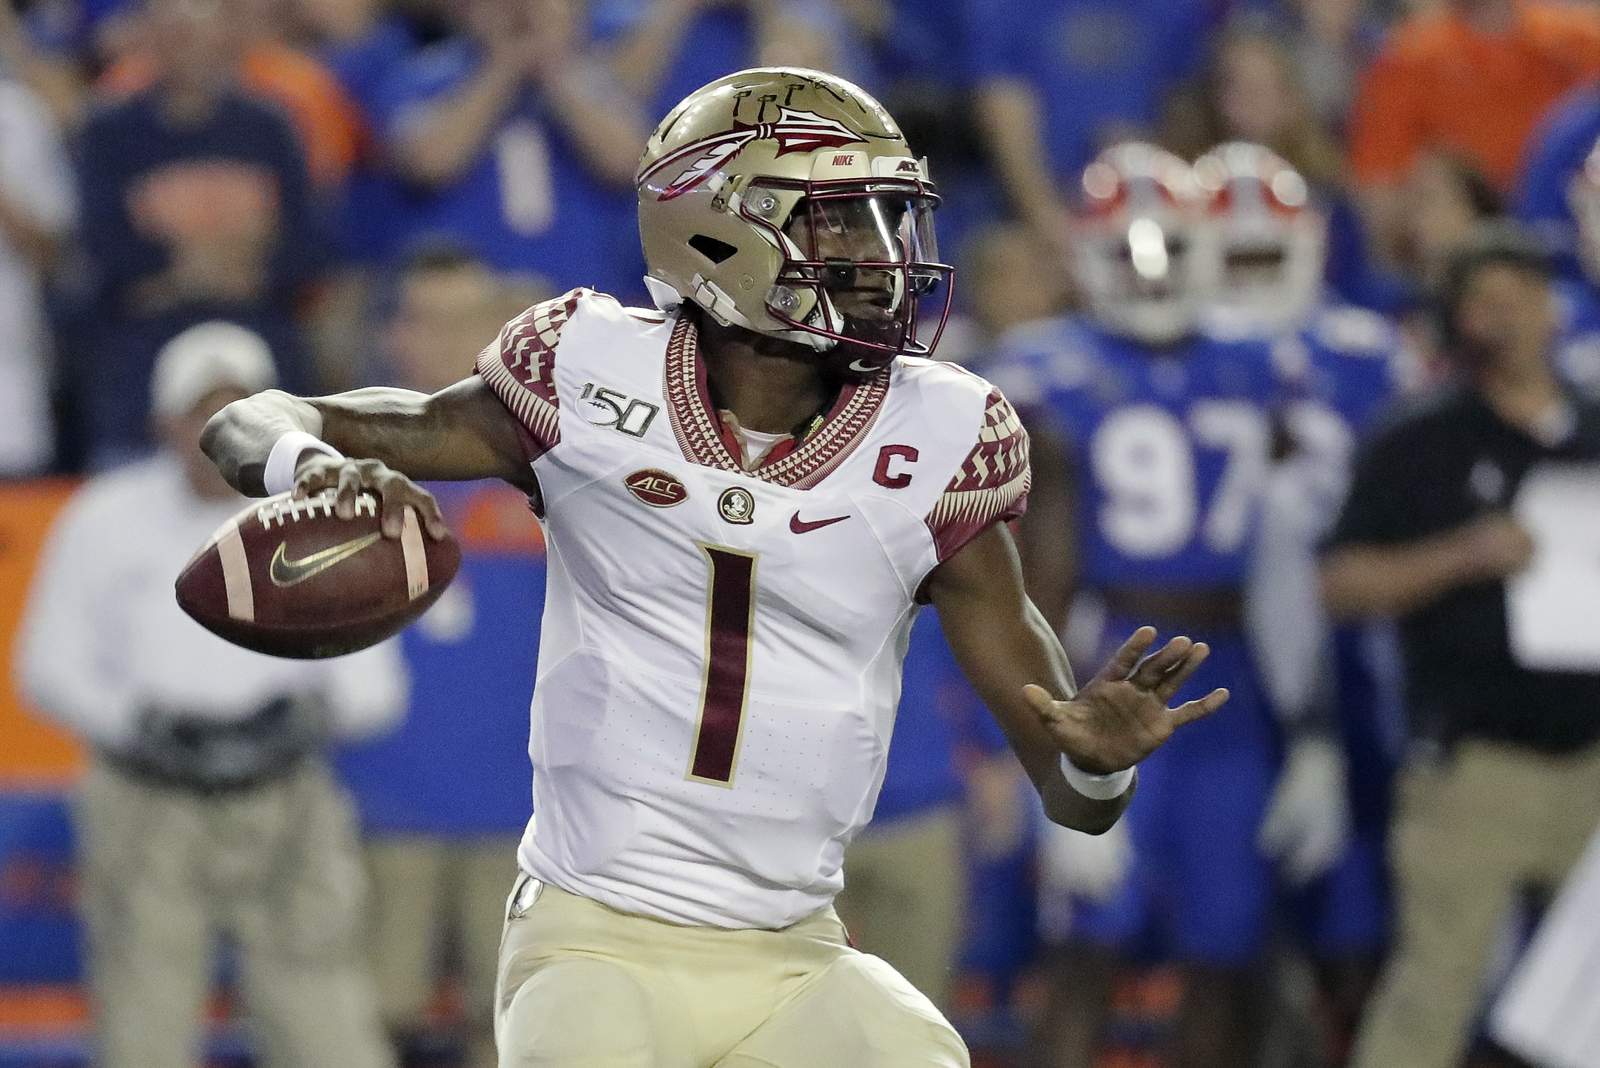 Florida State vs. Jacksonville State: How to watch, stream, listen